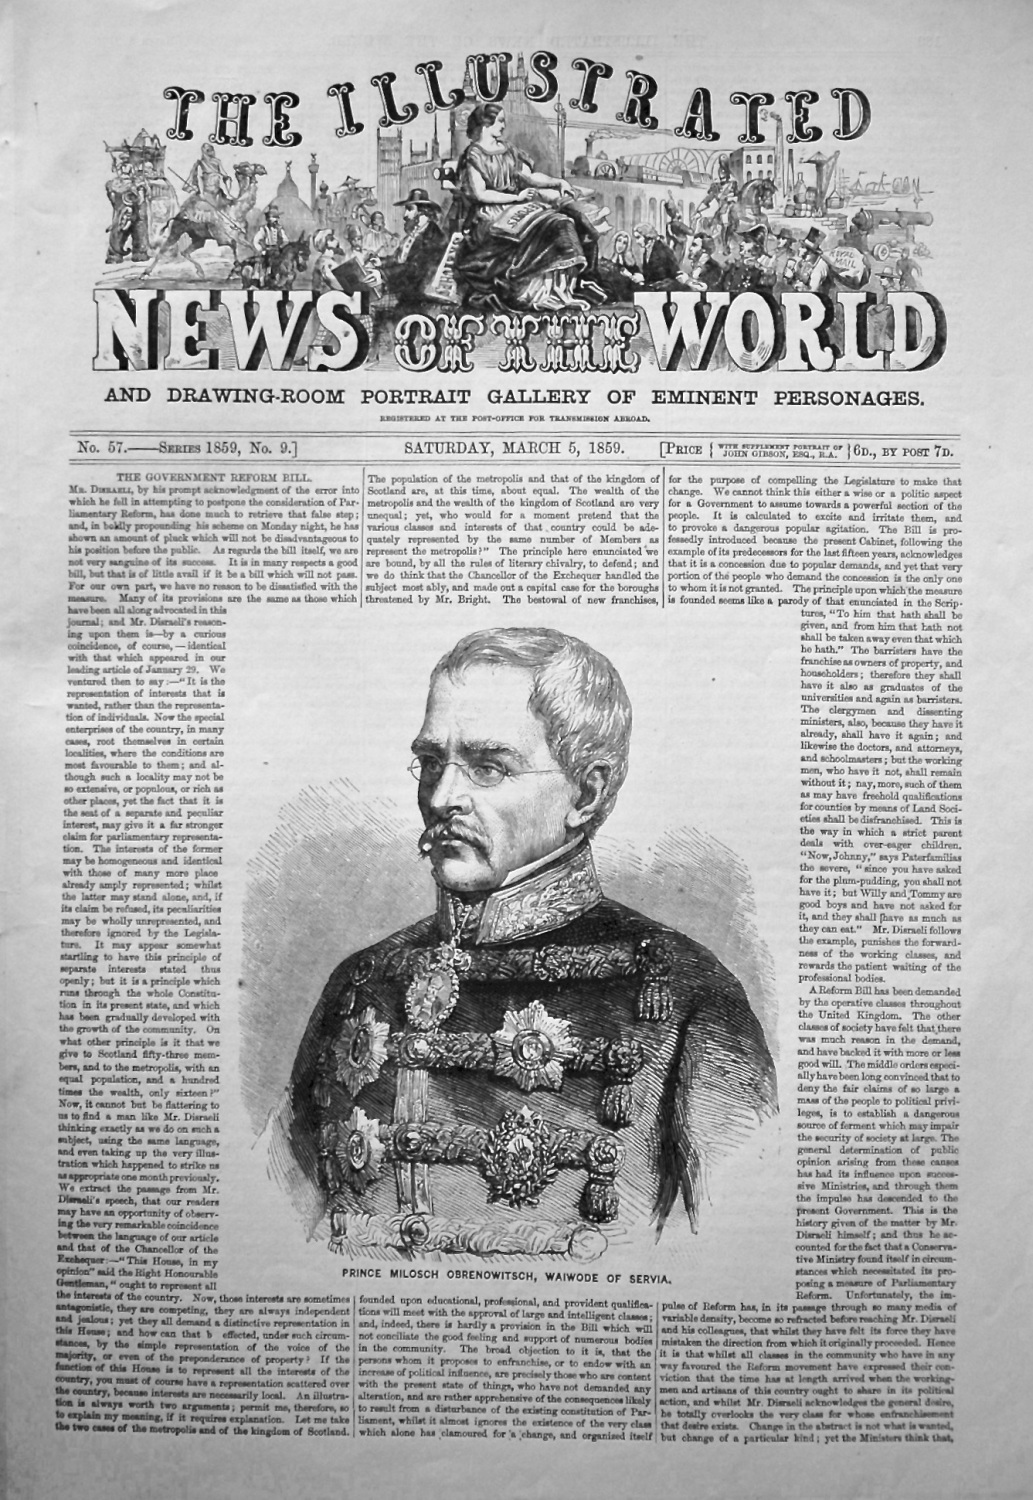 The Illustrated News of the World,  March 5th, 1859.